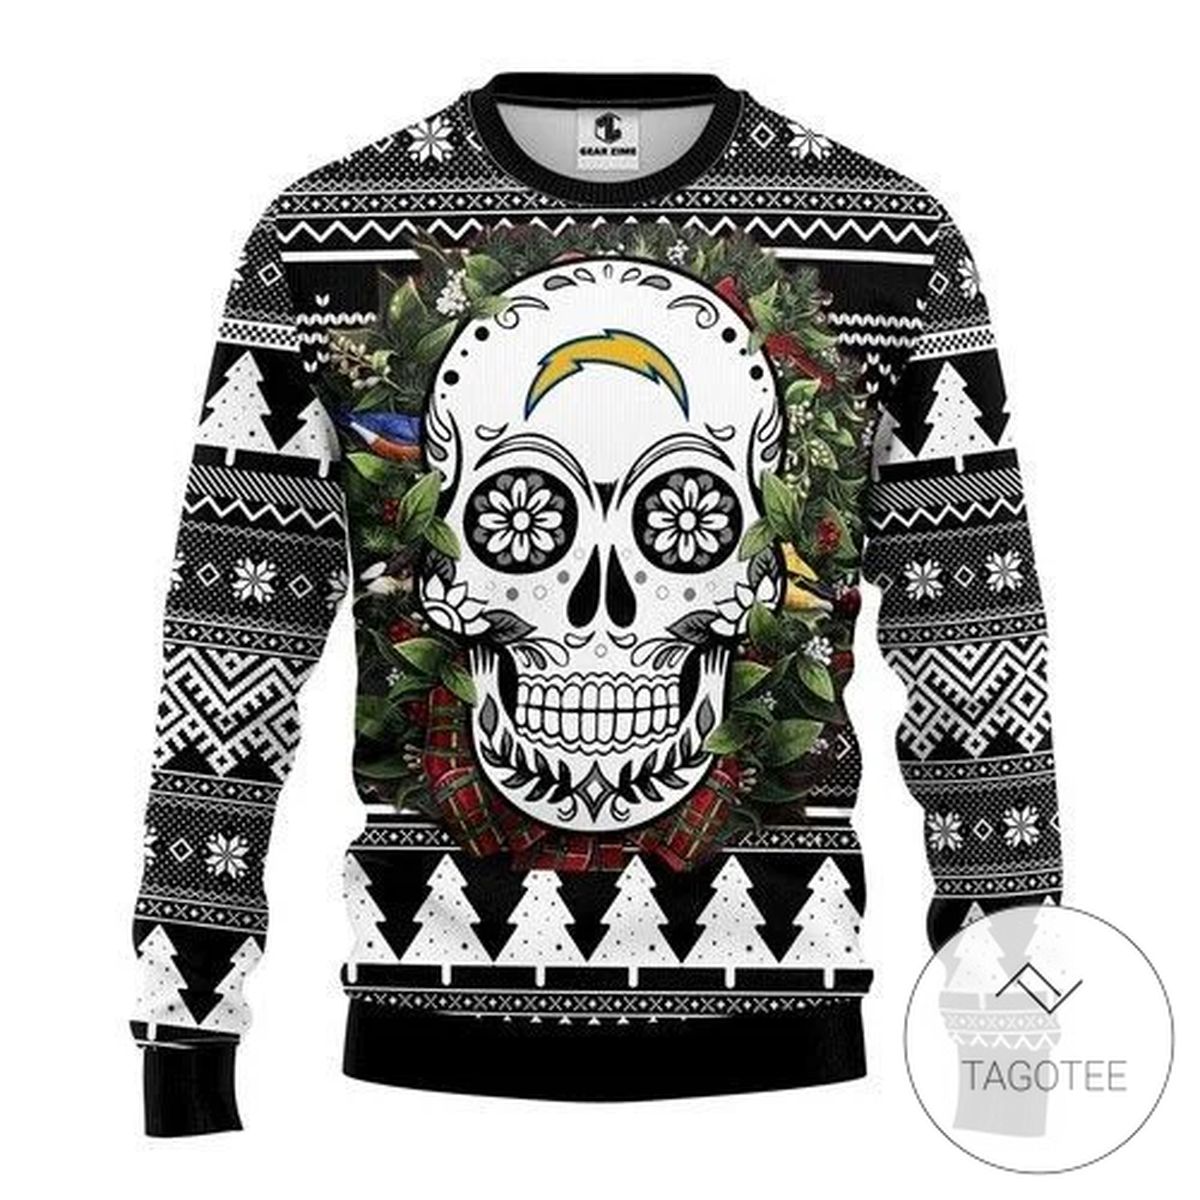 San Diego Chargers Skull Flower Sweatshirt Knitted Ugly Christmas Sweater